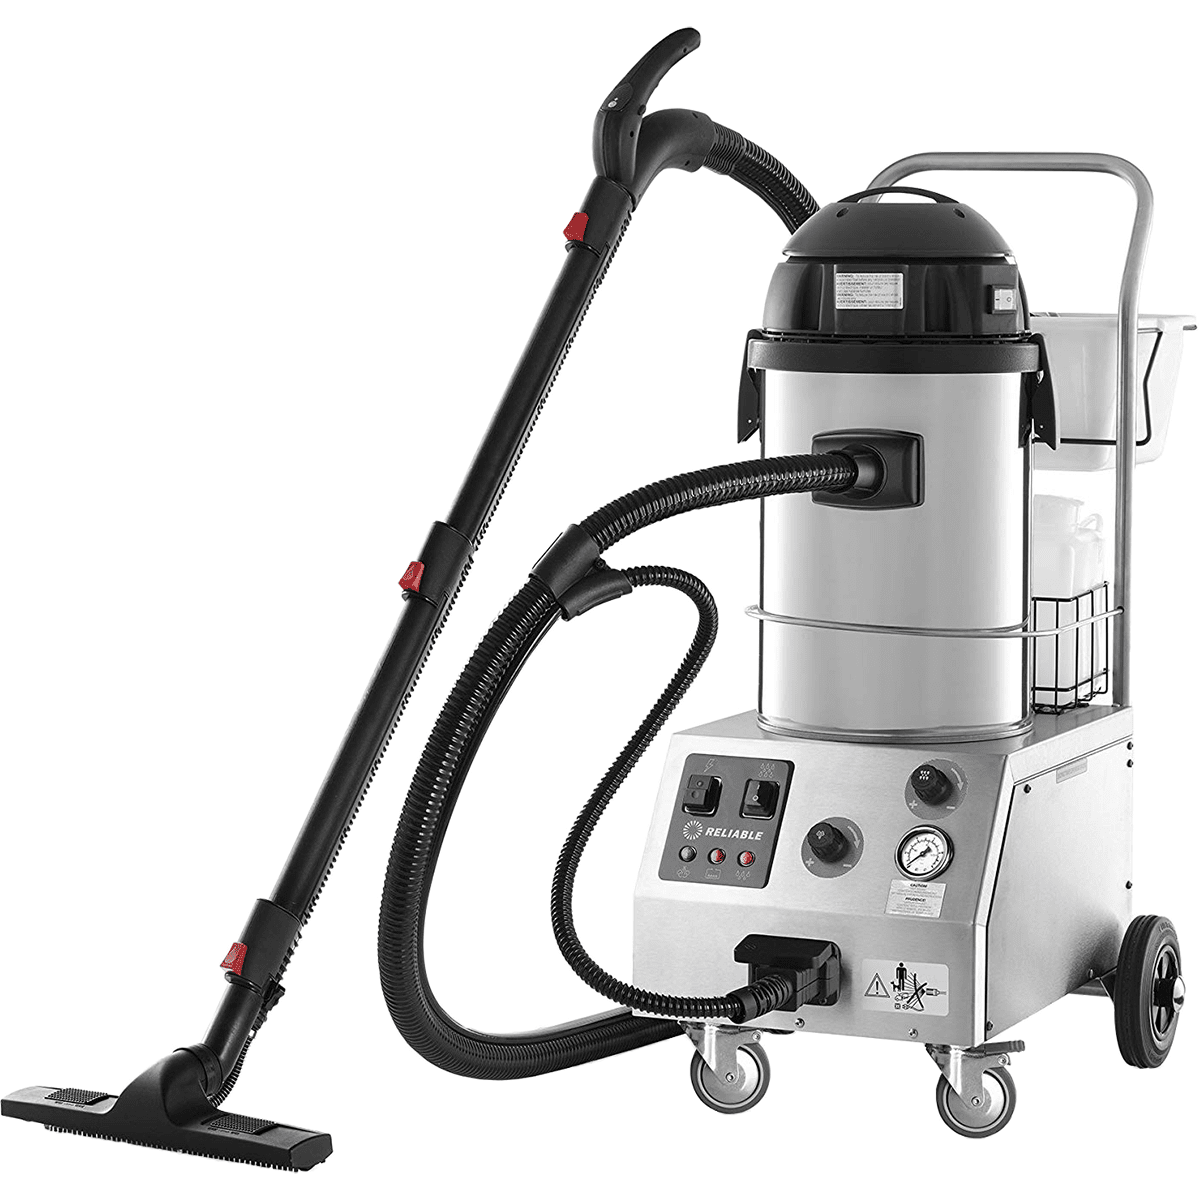 Reliable Tandem Pro 2000CV Commercial Steam Cleaning System